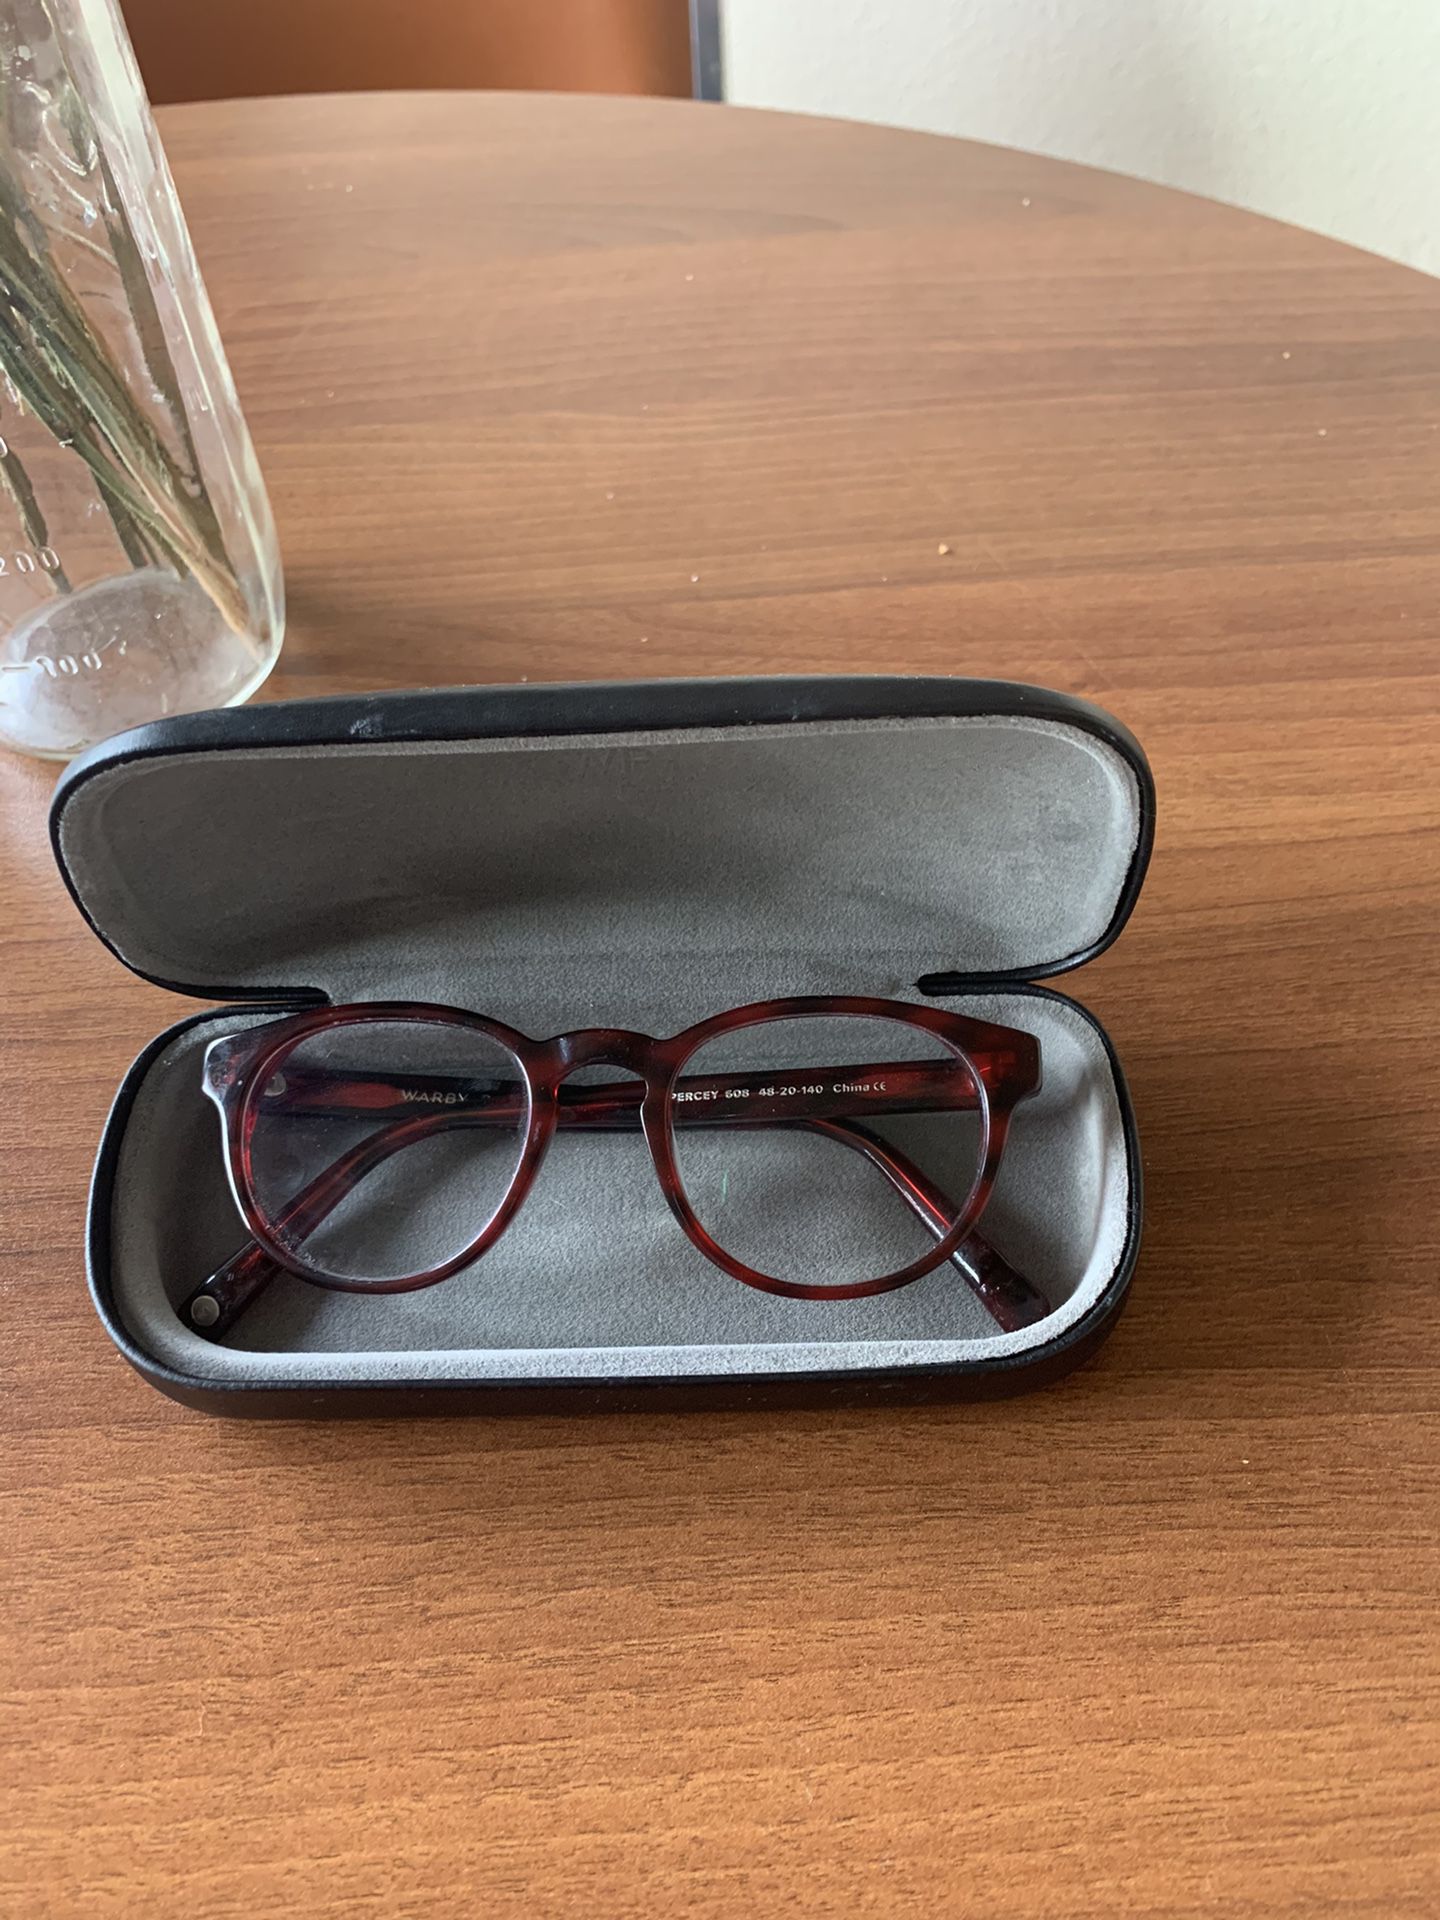 Warby Parker Percy Glasses